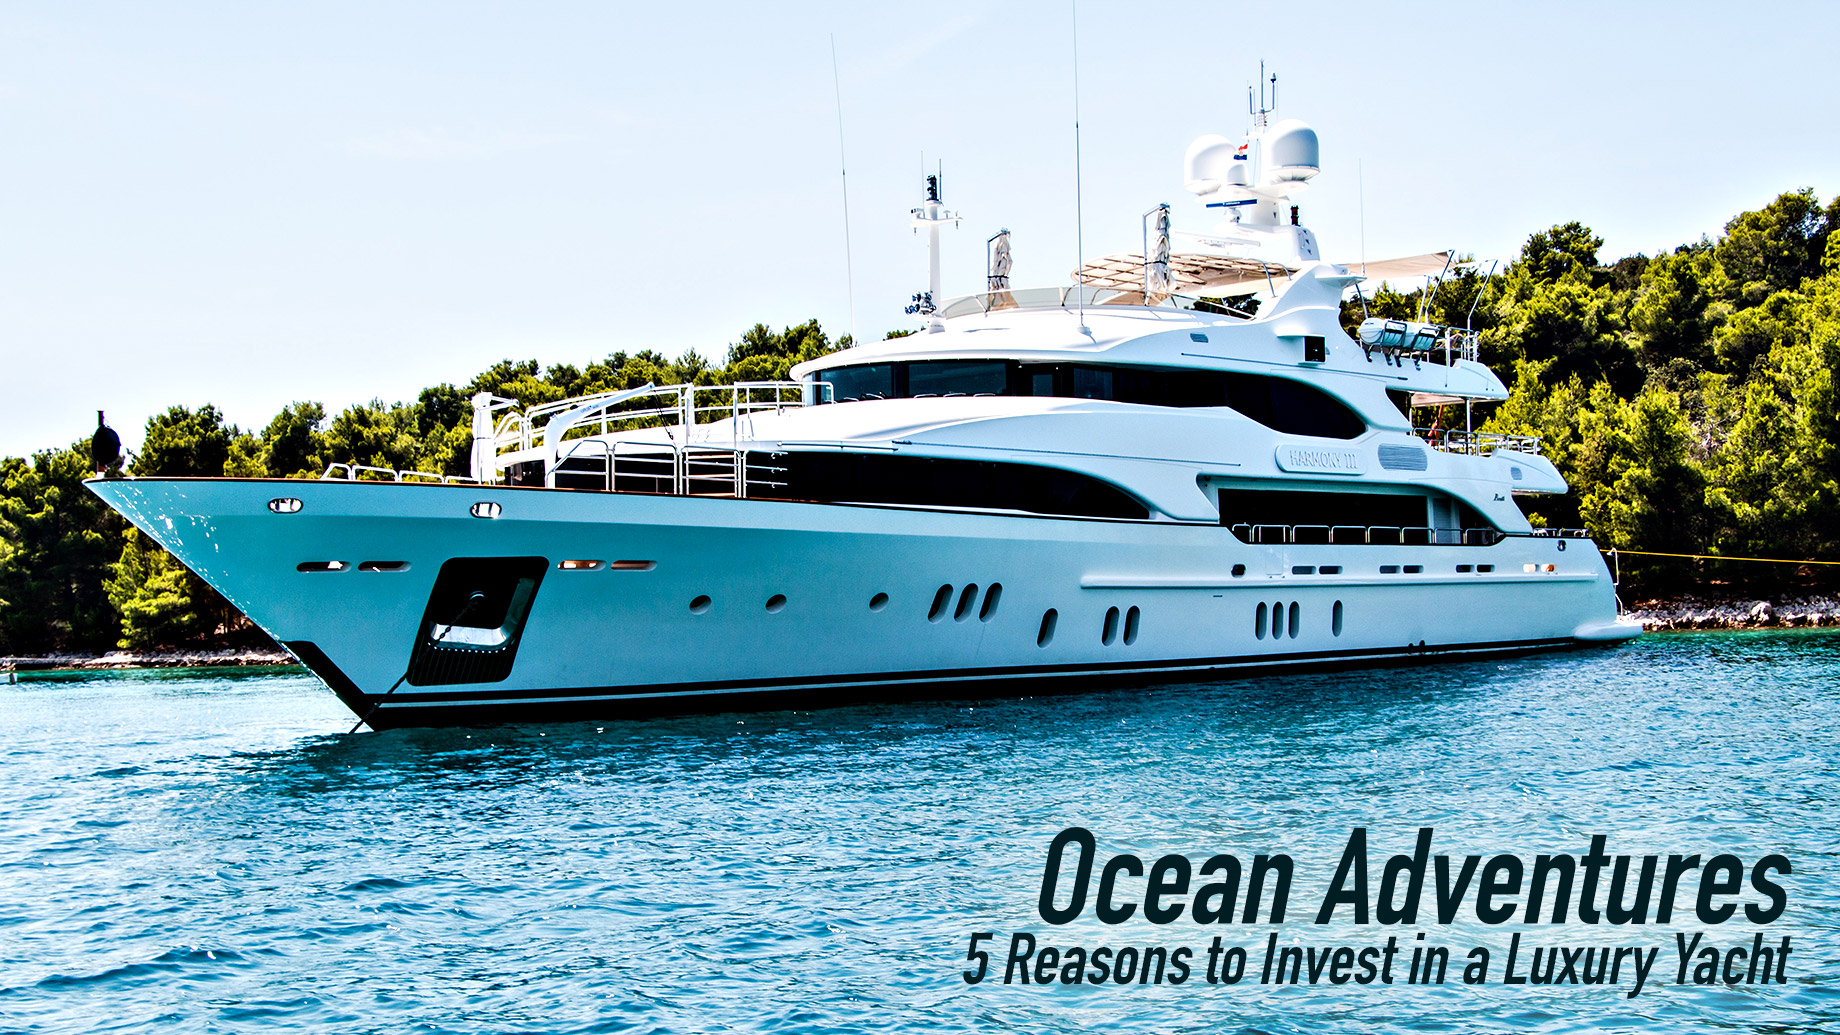 Ocean Adventures - 5 Reasons to Invest in a Luxury Yacht